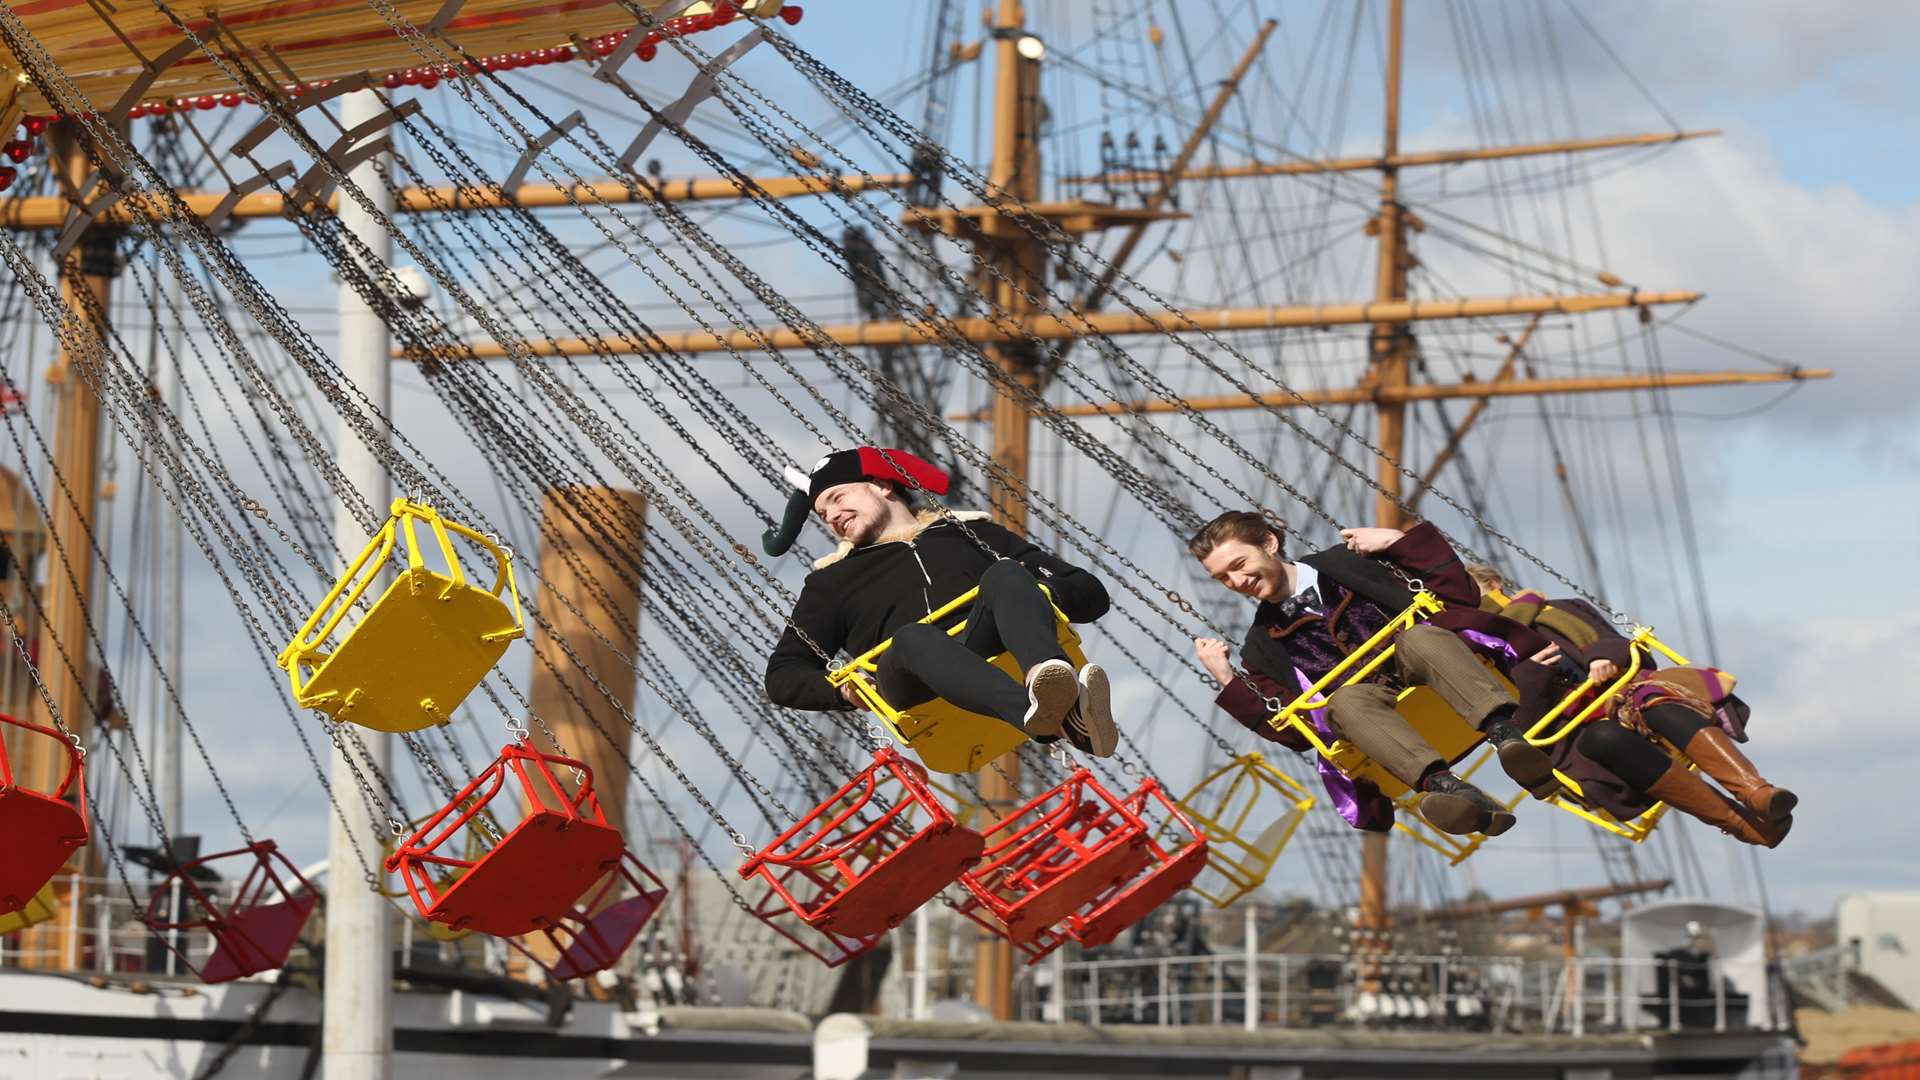 There will be a traditional funfair at the Historic Dockyard, Chatham's Festival of Steam and Transport